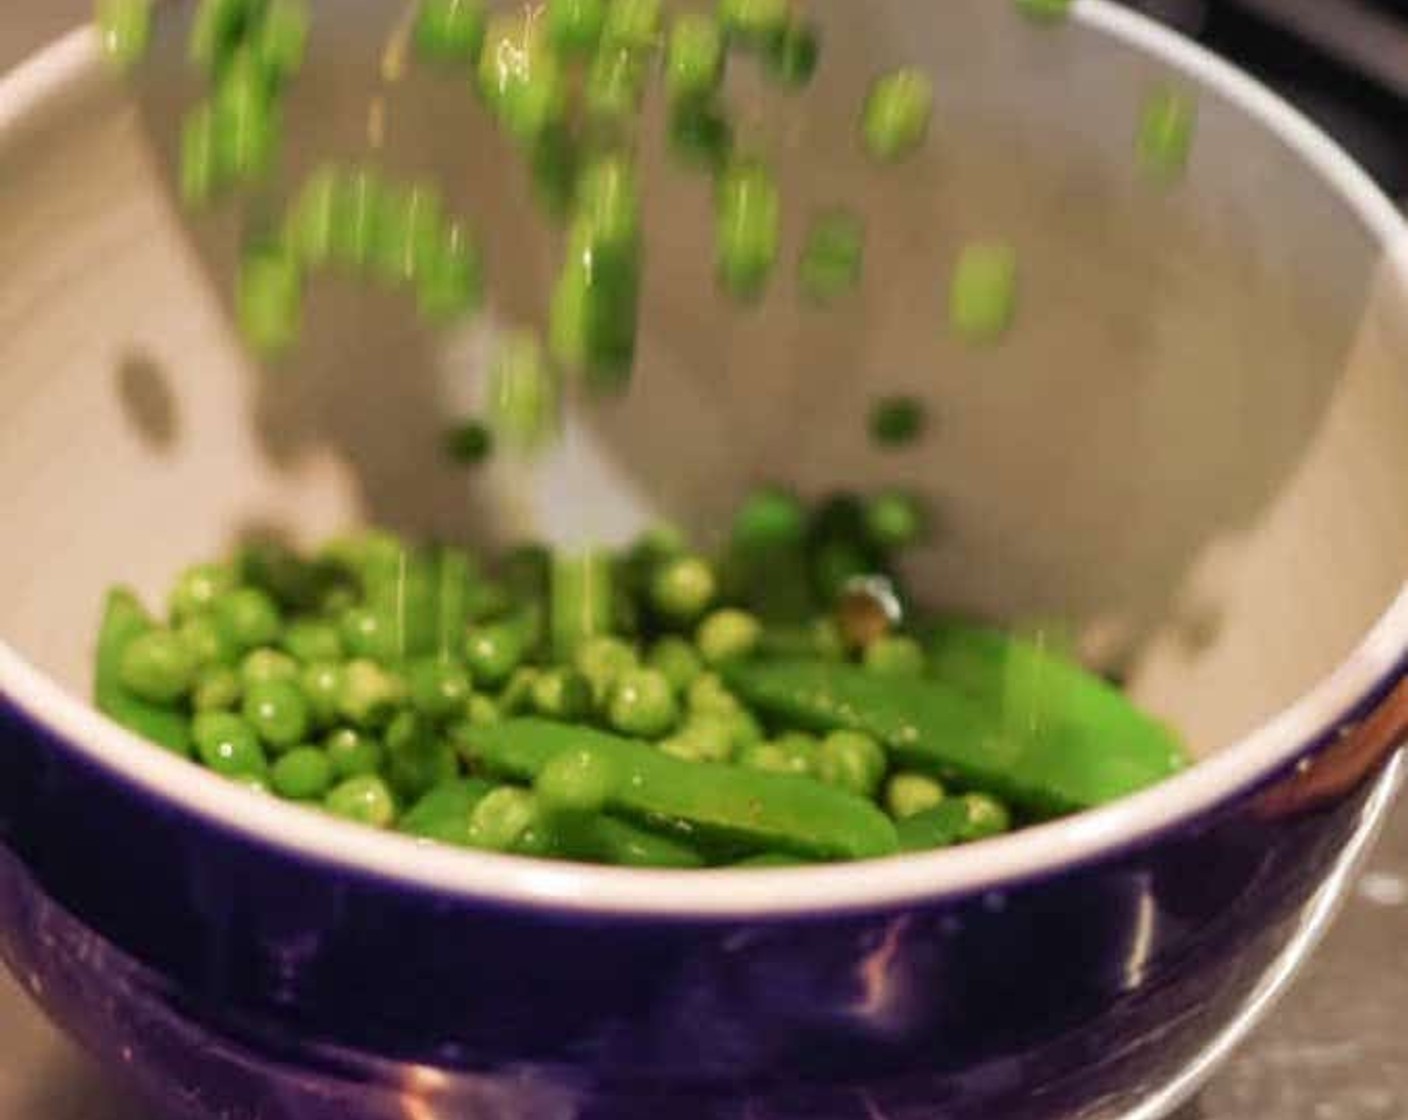 step 3 Stir in the Frozen Green Peas (3 1/3 cups) and cook while stirring for 3 minutes more. Transfer to a bowl and set aside.